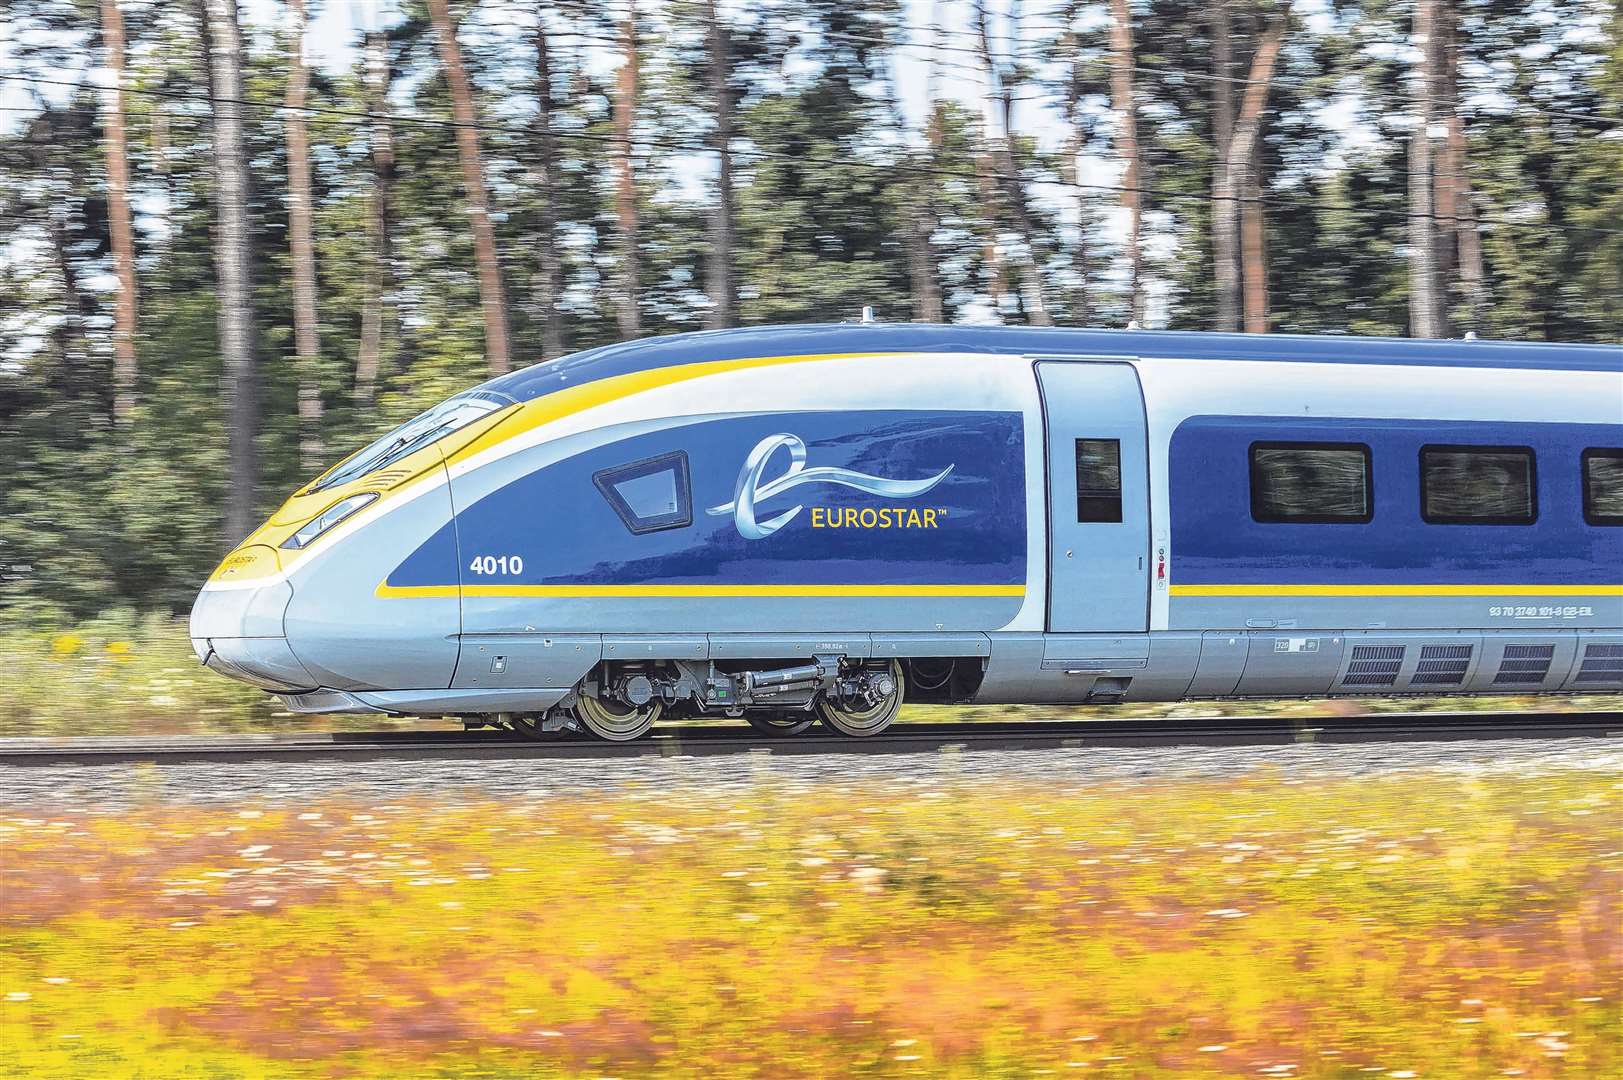 Eurostar was struggling with a debt repayment - but has now secured vital funding